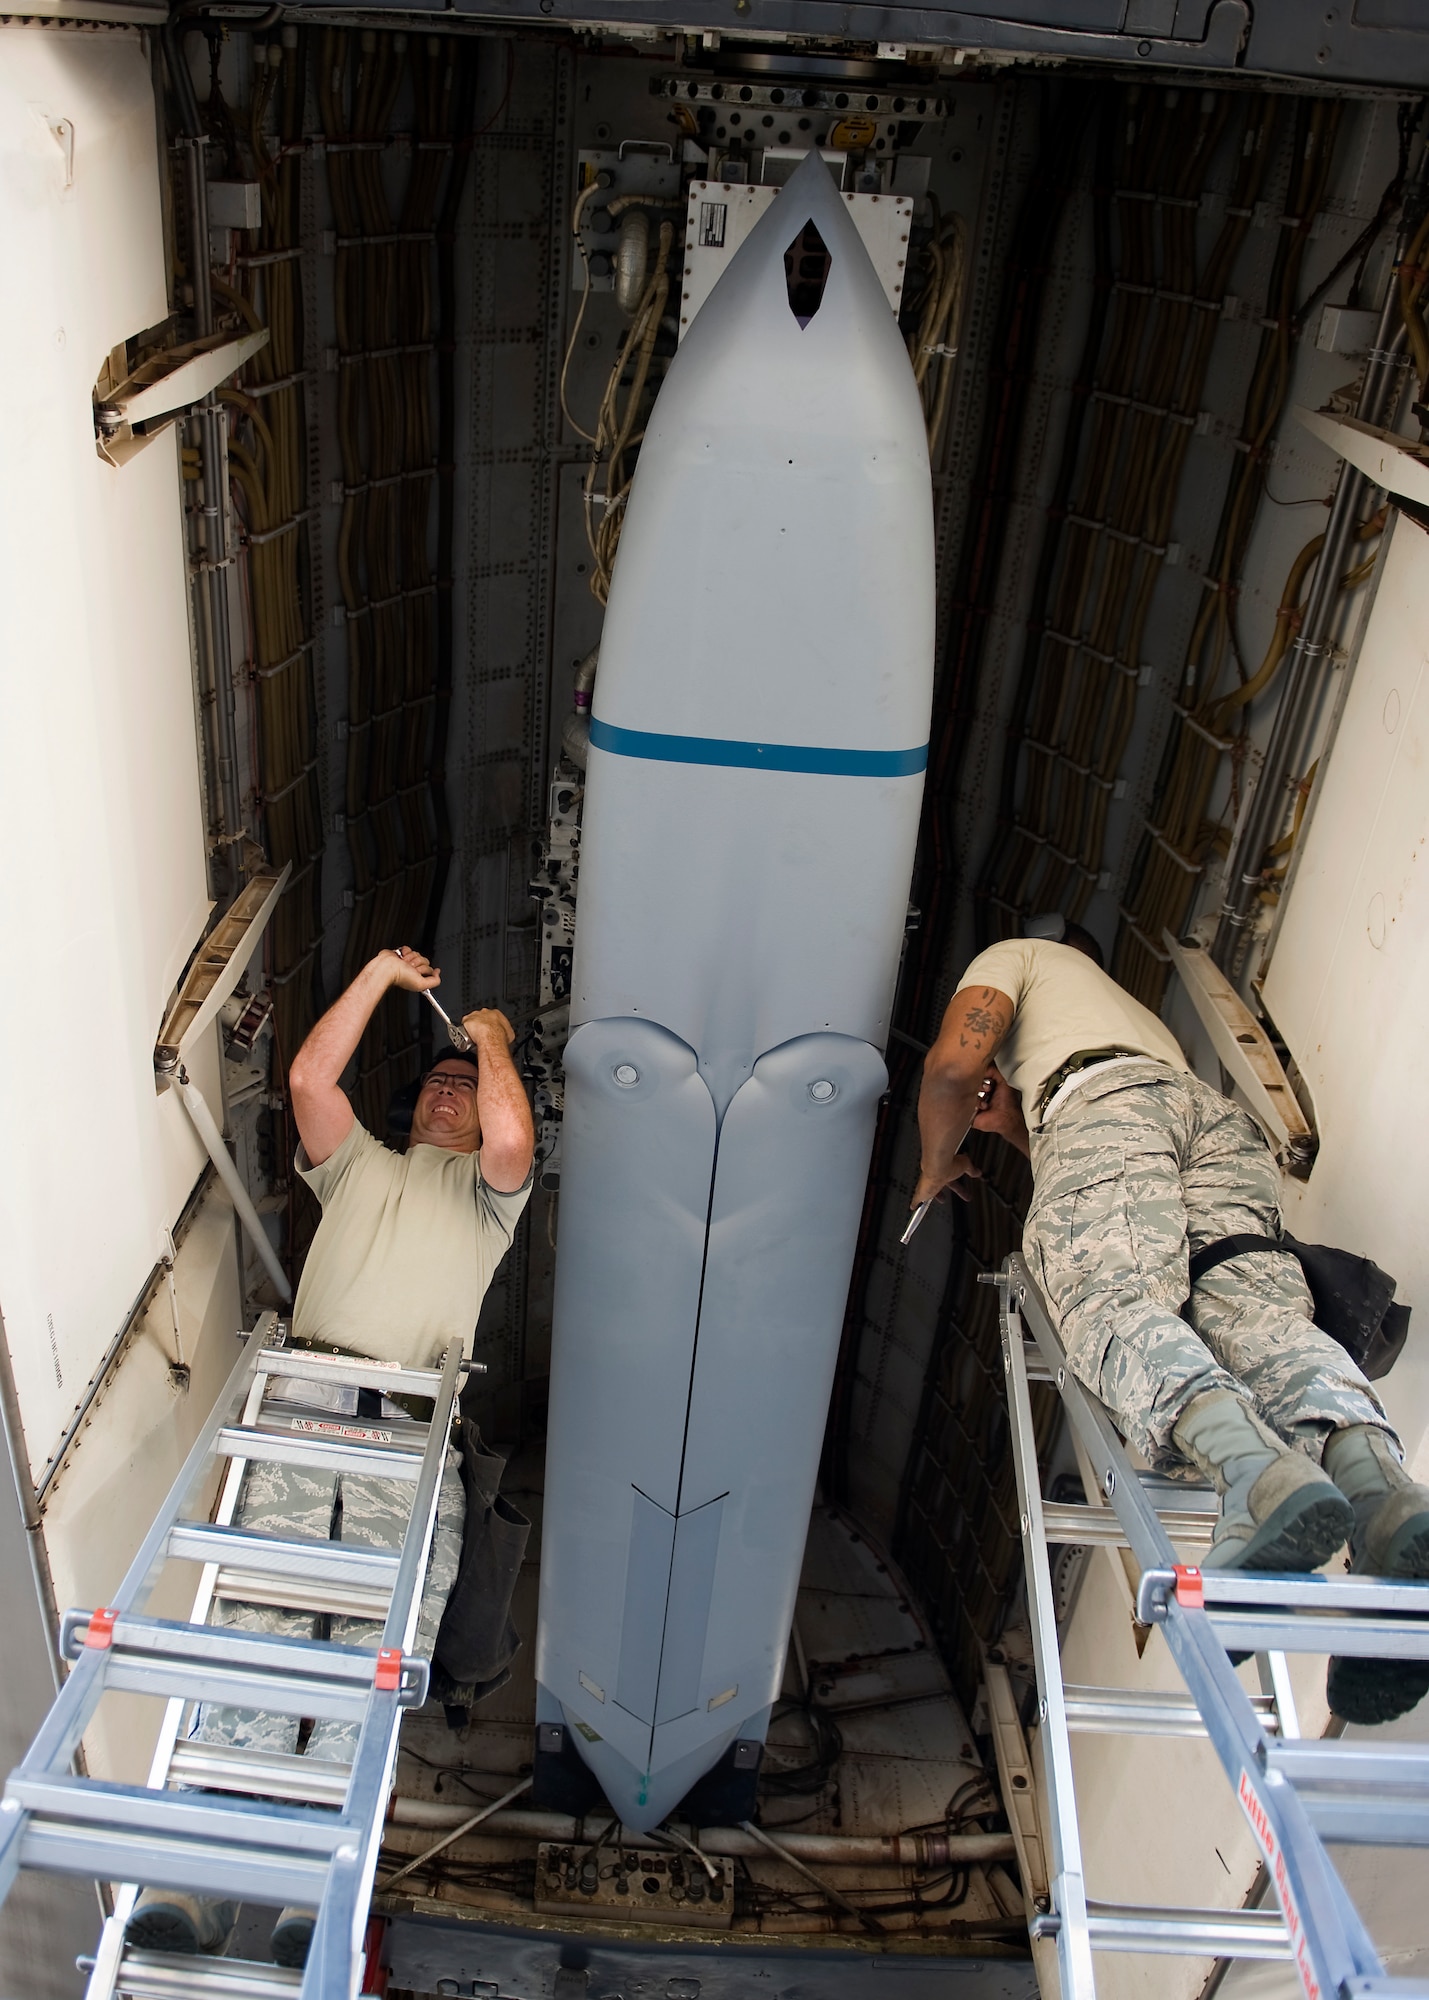 U.S. Air Force Master Sgt. Troy Drasher (left) and Tech. Sgt. Alfred Agee both from the 7th Maintenance Group load a Long Range Anti-Ship Missile (LRASM) into the bomb bay of a B-1 Bomber June 12, 2013, at Dyess Air Force Base, Texas. Unlike current anti-ship missiles the LRASM will be capable of conducting autonomous targeting, relying on on-board targeting systems to independently acquire the target without the presence of prior, precision intelligence, or supporting services like Global Positioning Satellite navigation and data-links. These capabilities will enable positive target identification, precision engagement of moving ships and establishing of initial target cueing in extremely hostile environment. (U.S. Air Force photo by Airman 1st Class Damon Kasberg/Released)